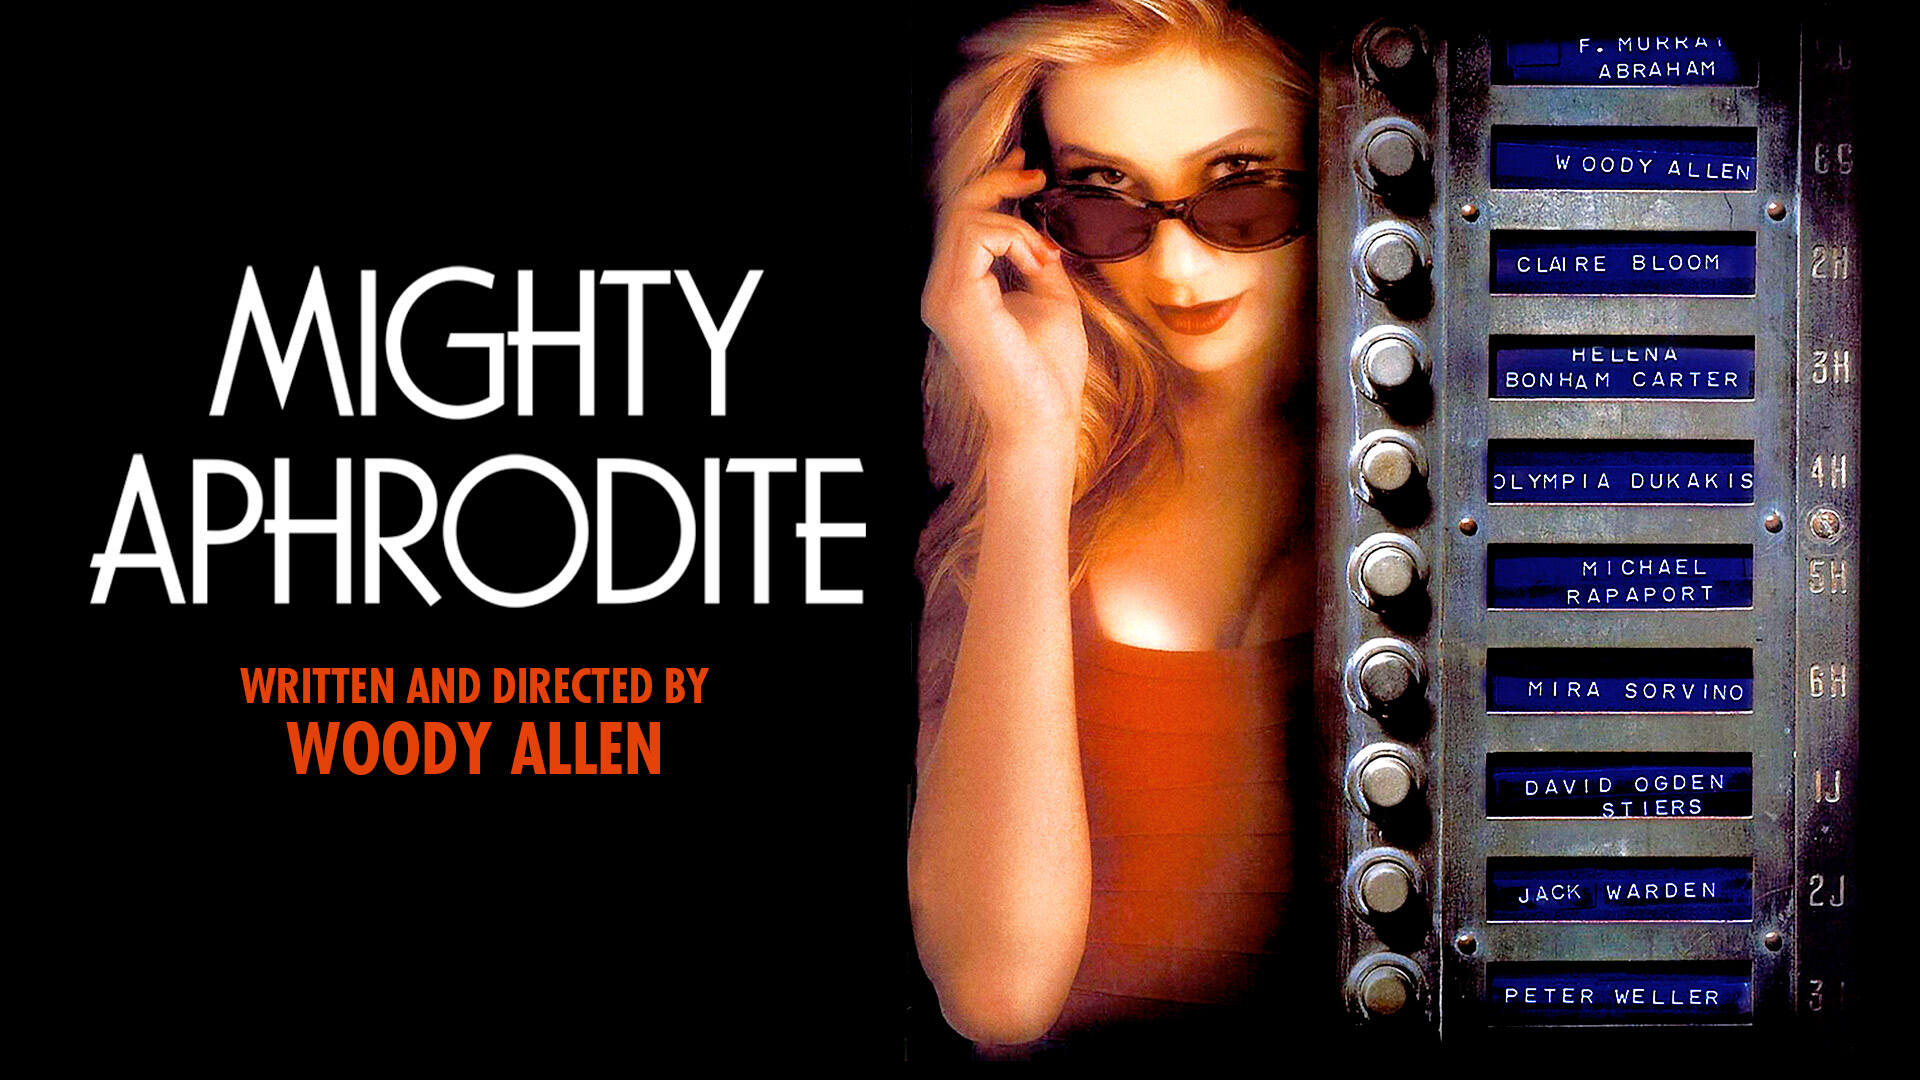 47-facts-about-the-movie-mighty-aphrodite